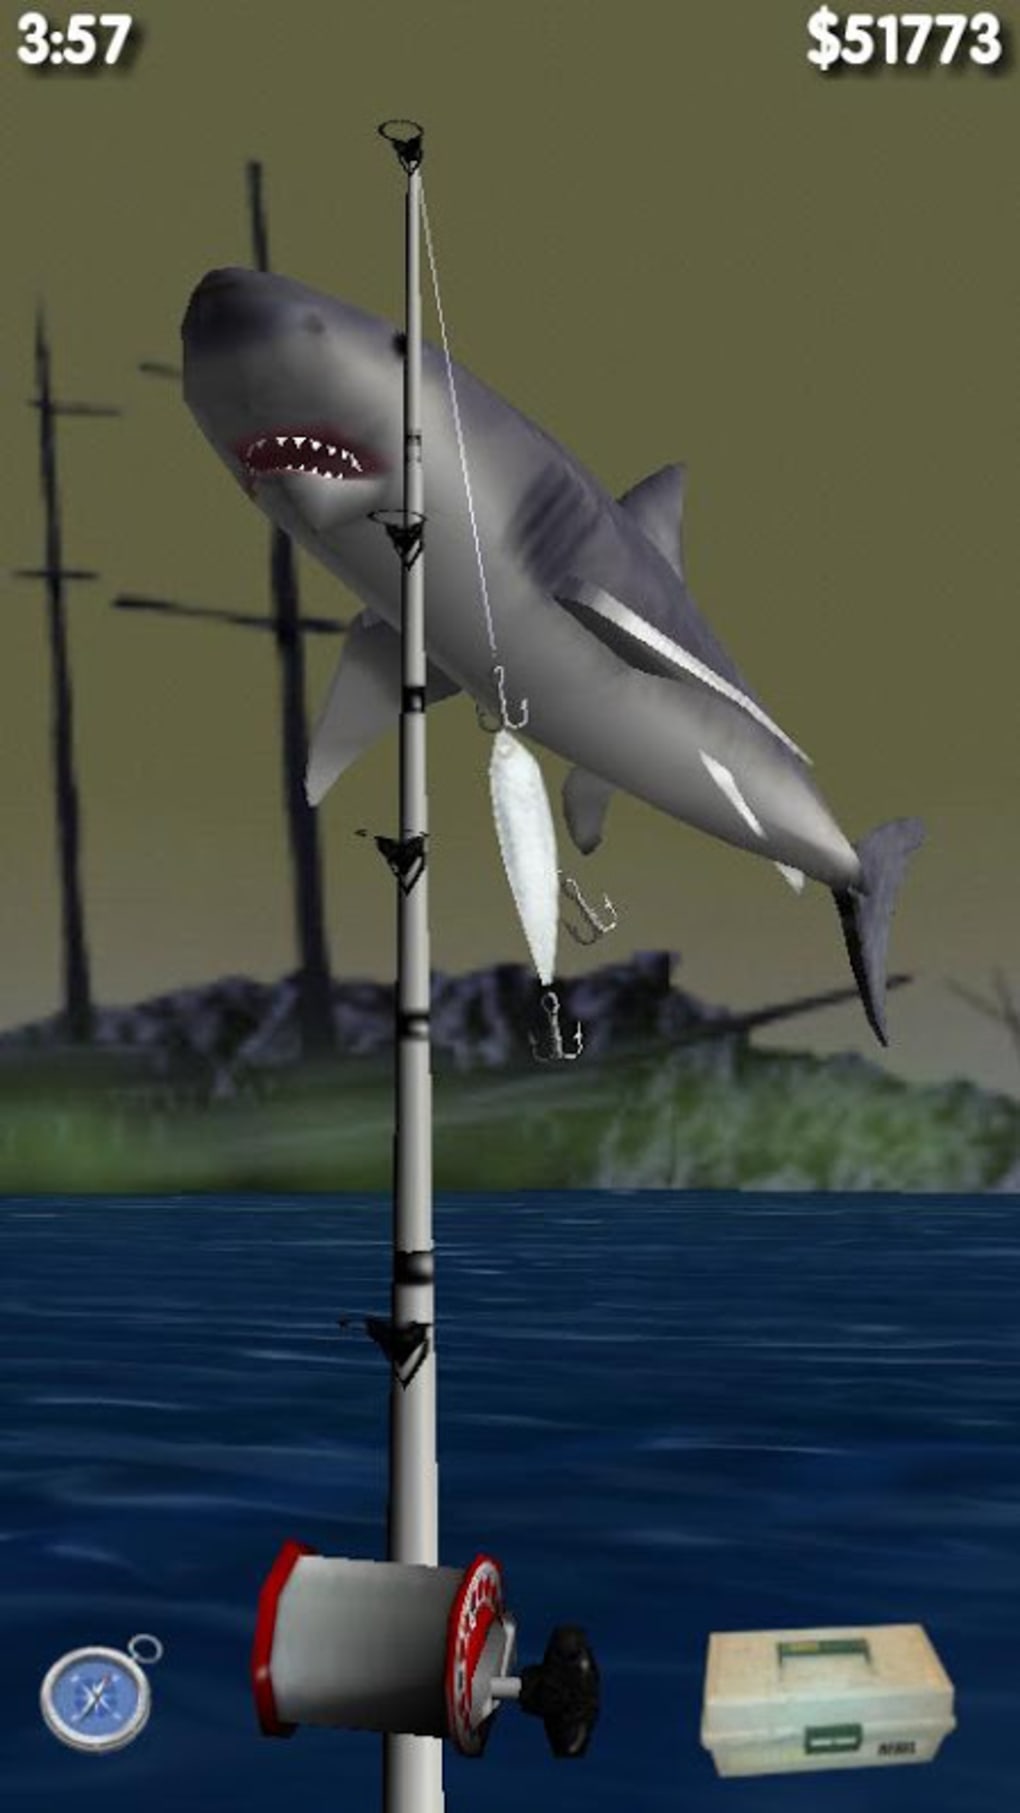 Fly Fishing 3D Game for Android - Download